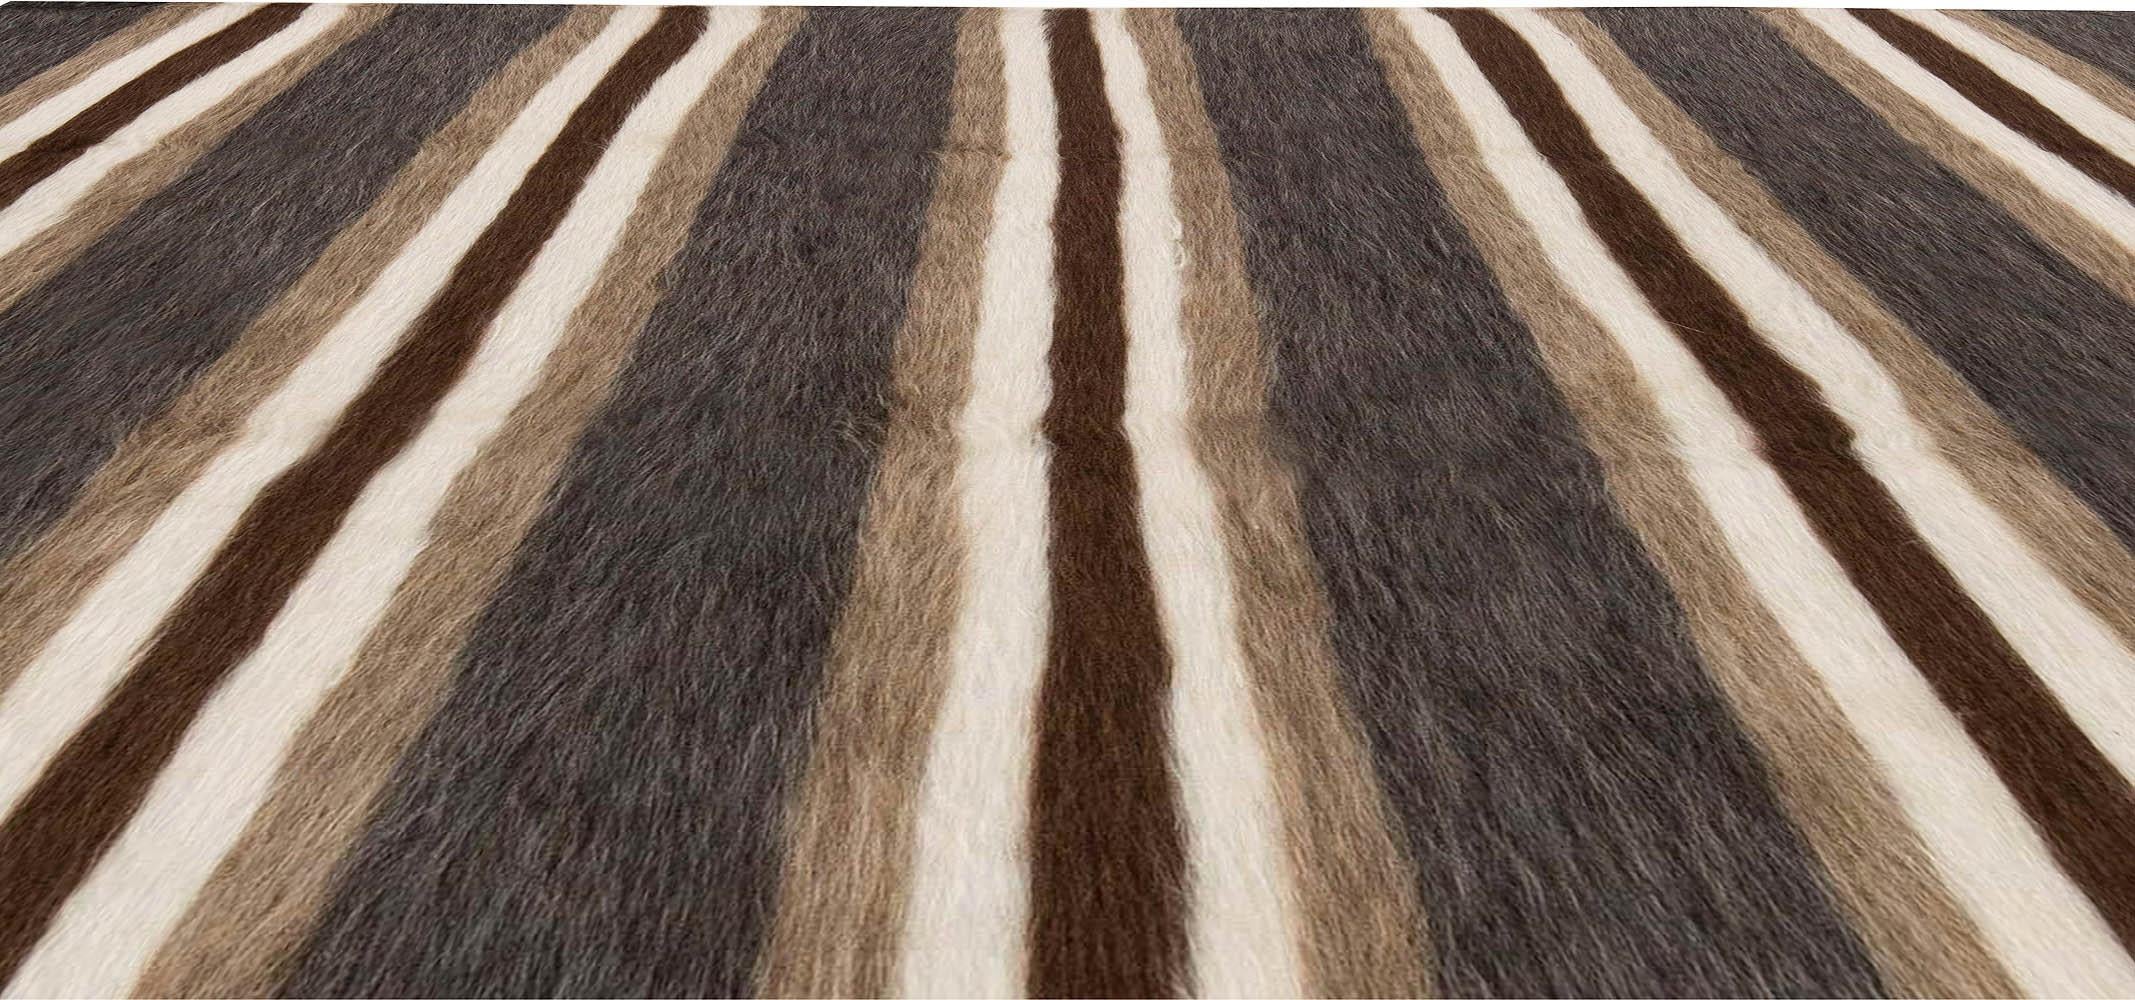 Modern Taurus Collection Striped Brown, White, Grey, Goat Hair Rug by Doris Leslie Blau For Sale